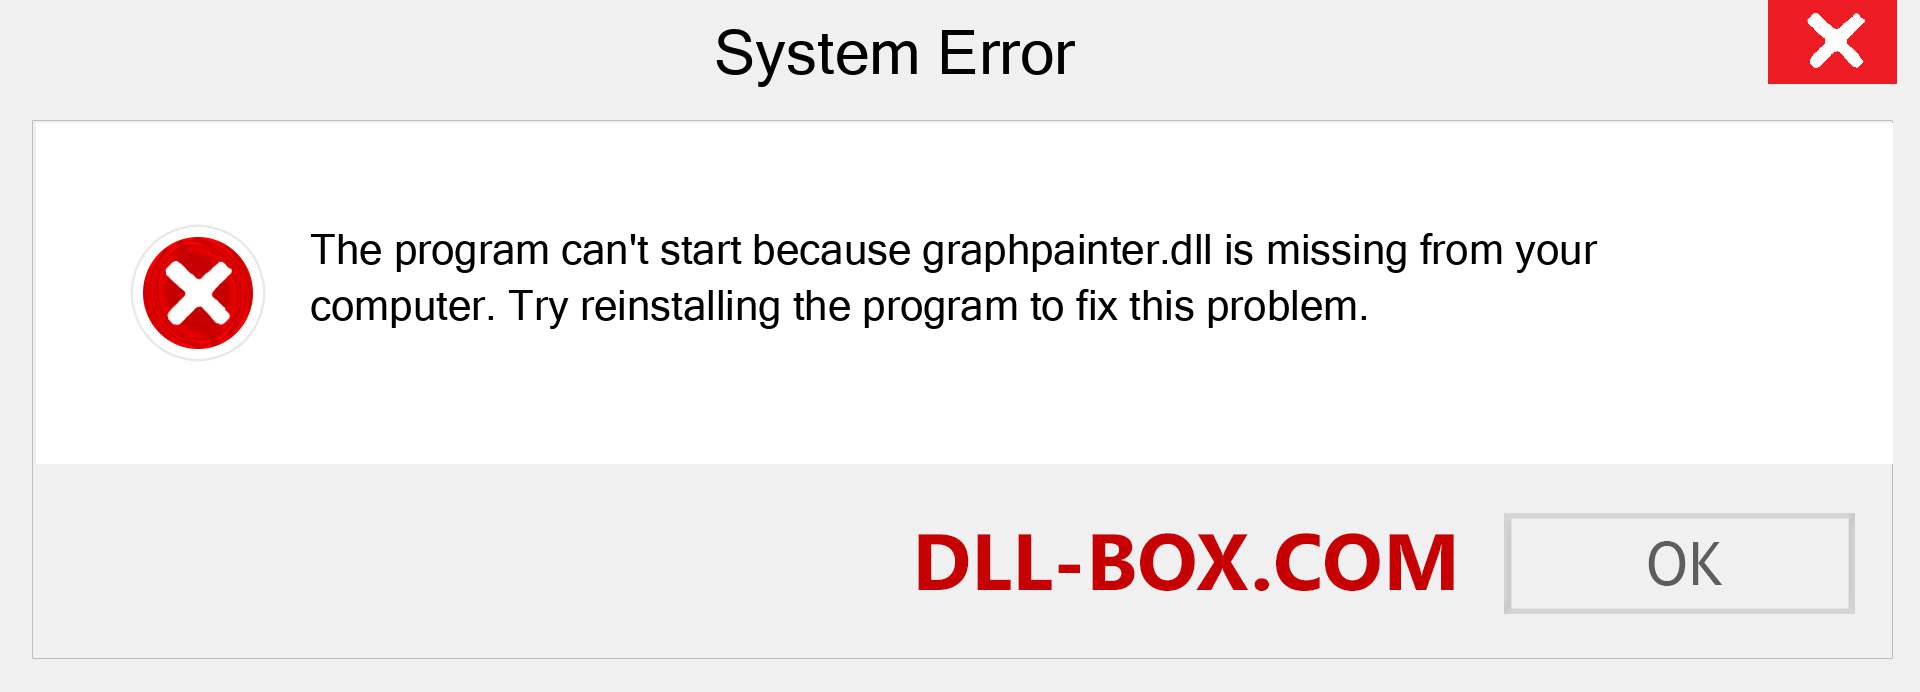  graphpainter.dll file is missing?. Download for Windows 7, 8, 10 - Fix  graphpainter dll Missing Error on Windows, photos, images